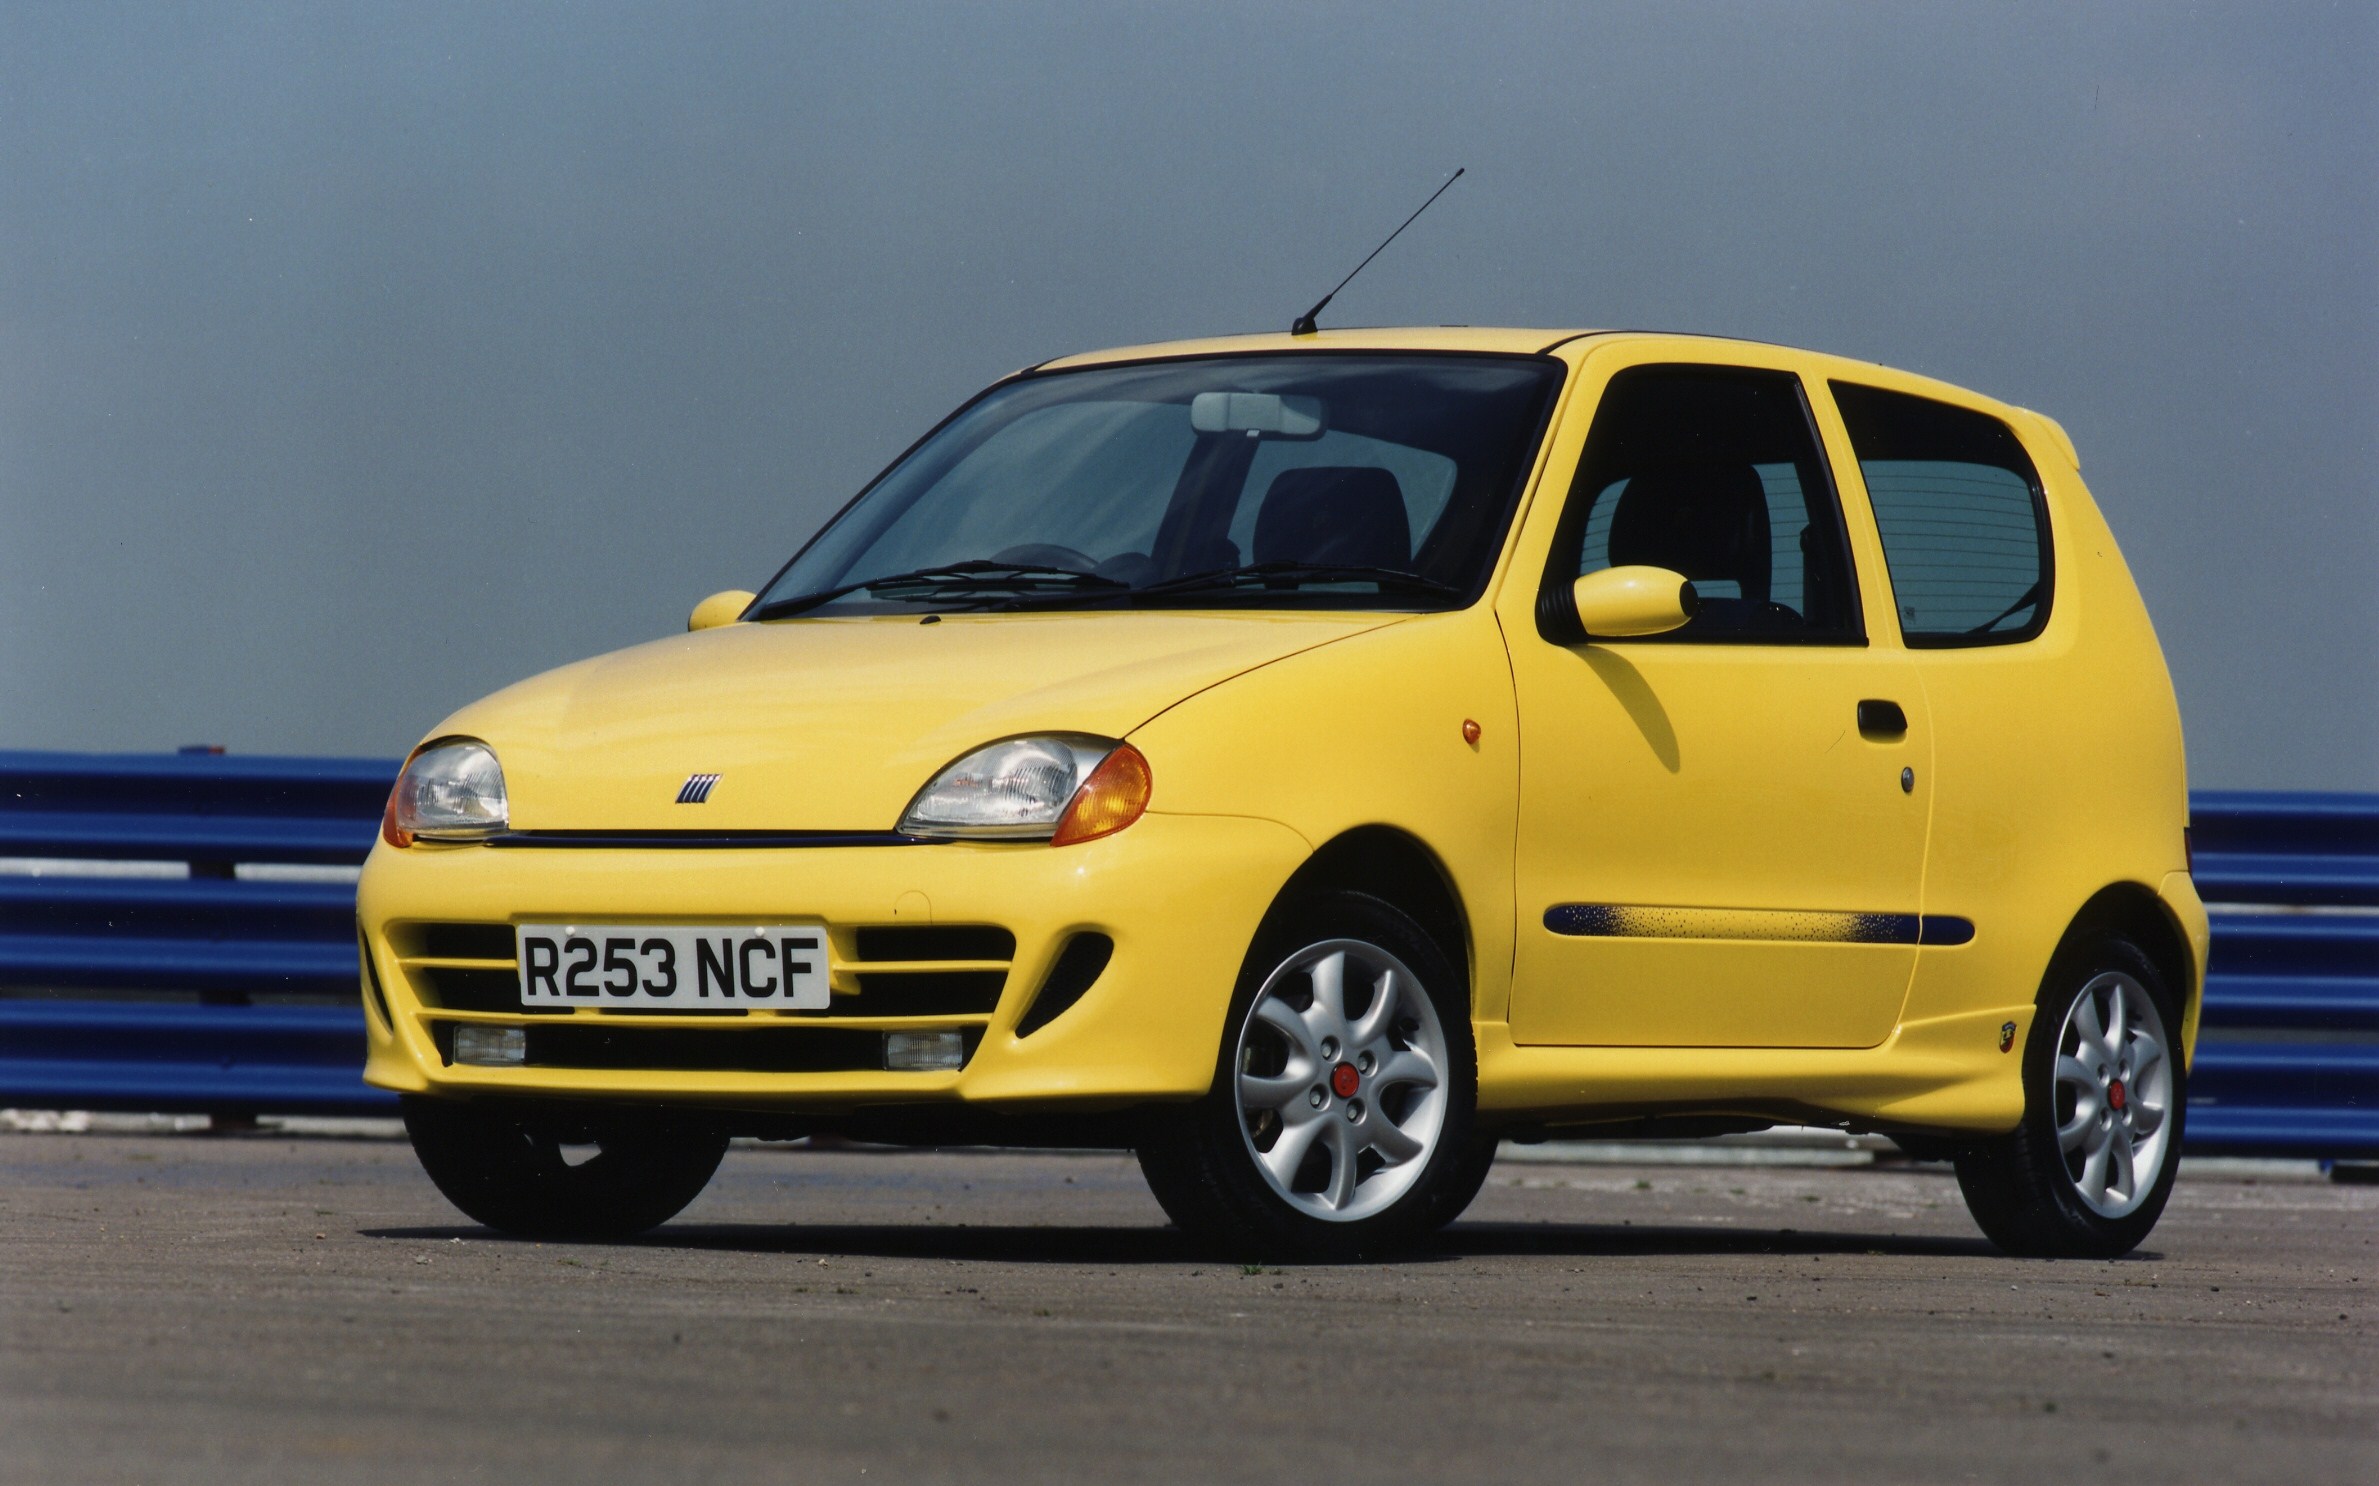 Fiat Seicento Sporting with Abarth Sport kit